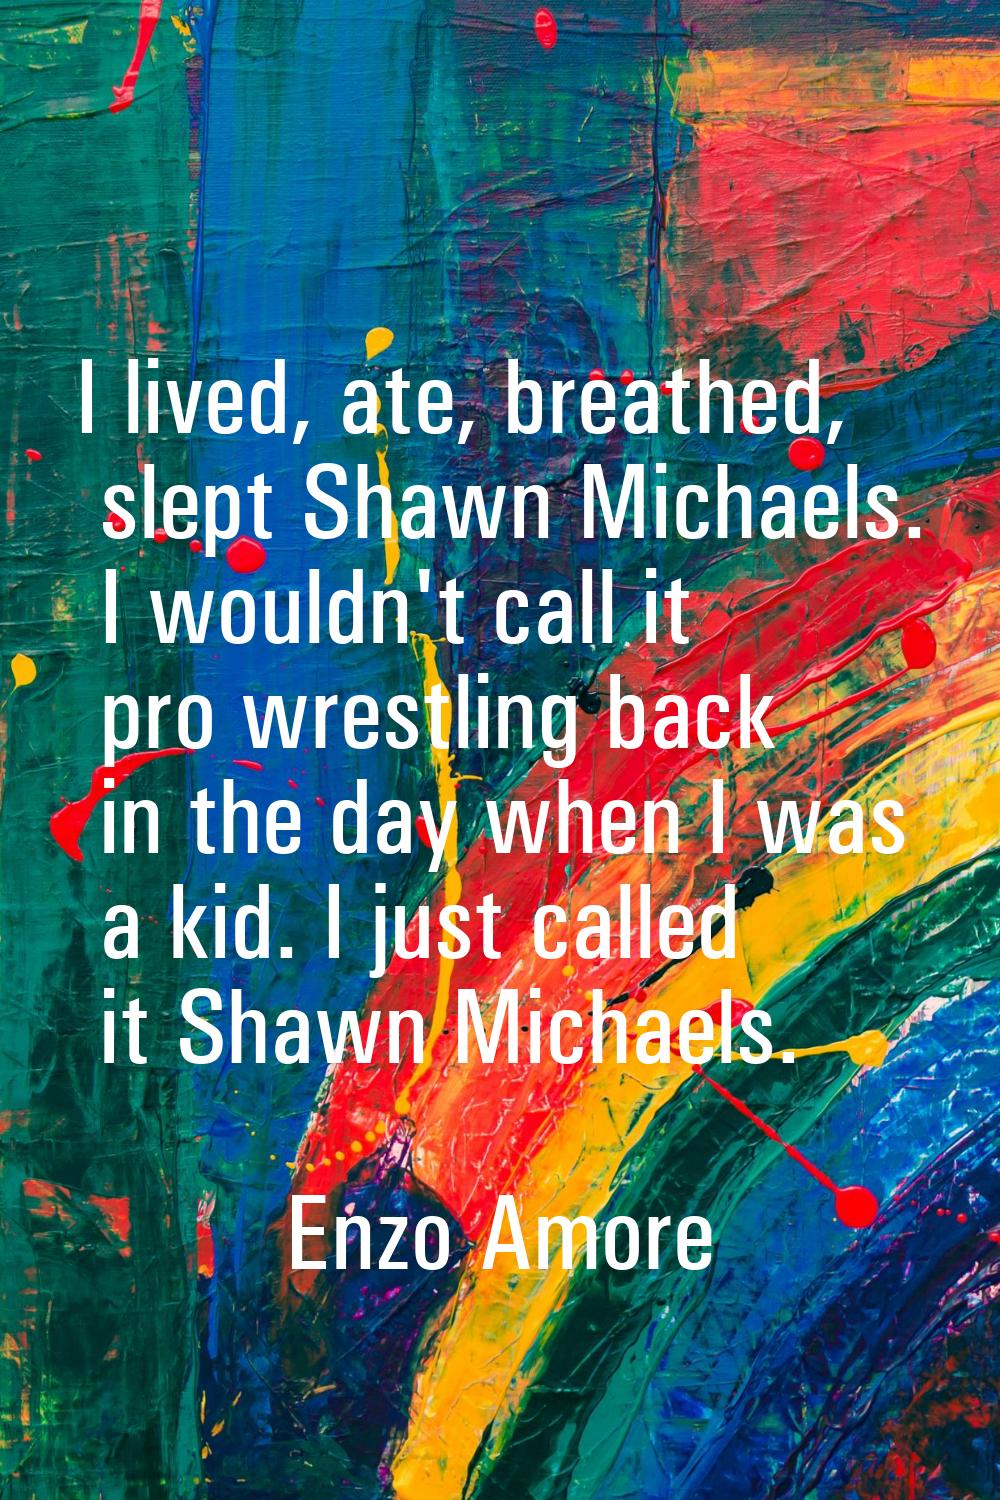 I lived, ate, breathed, slept Shawn Michaels. I wouldn't call it pro wrestling back in the day when